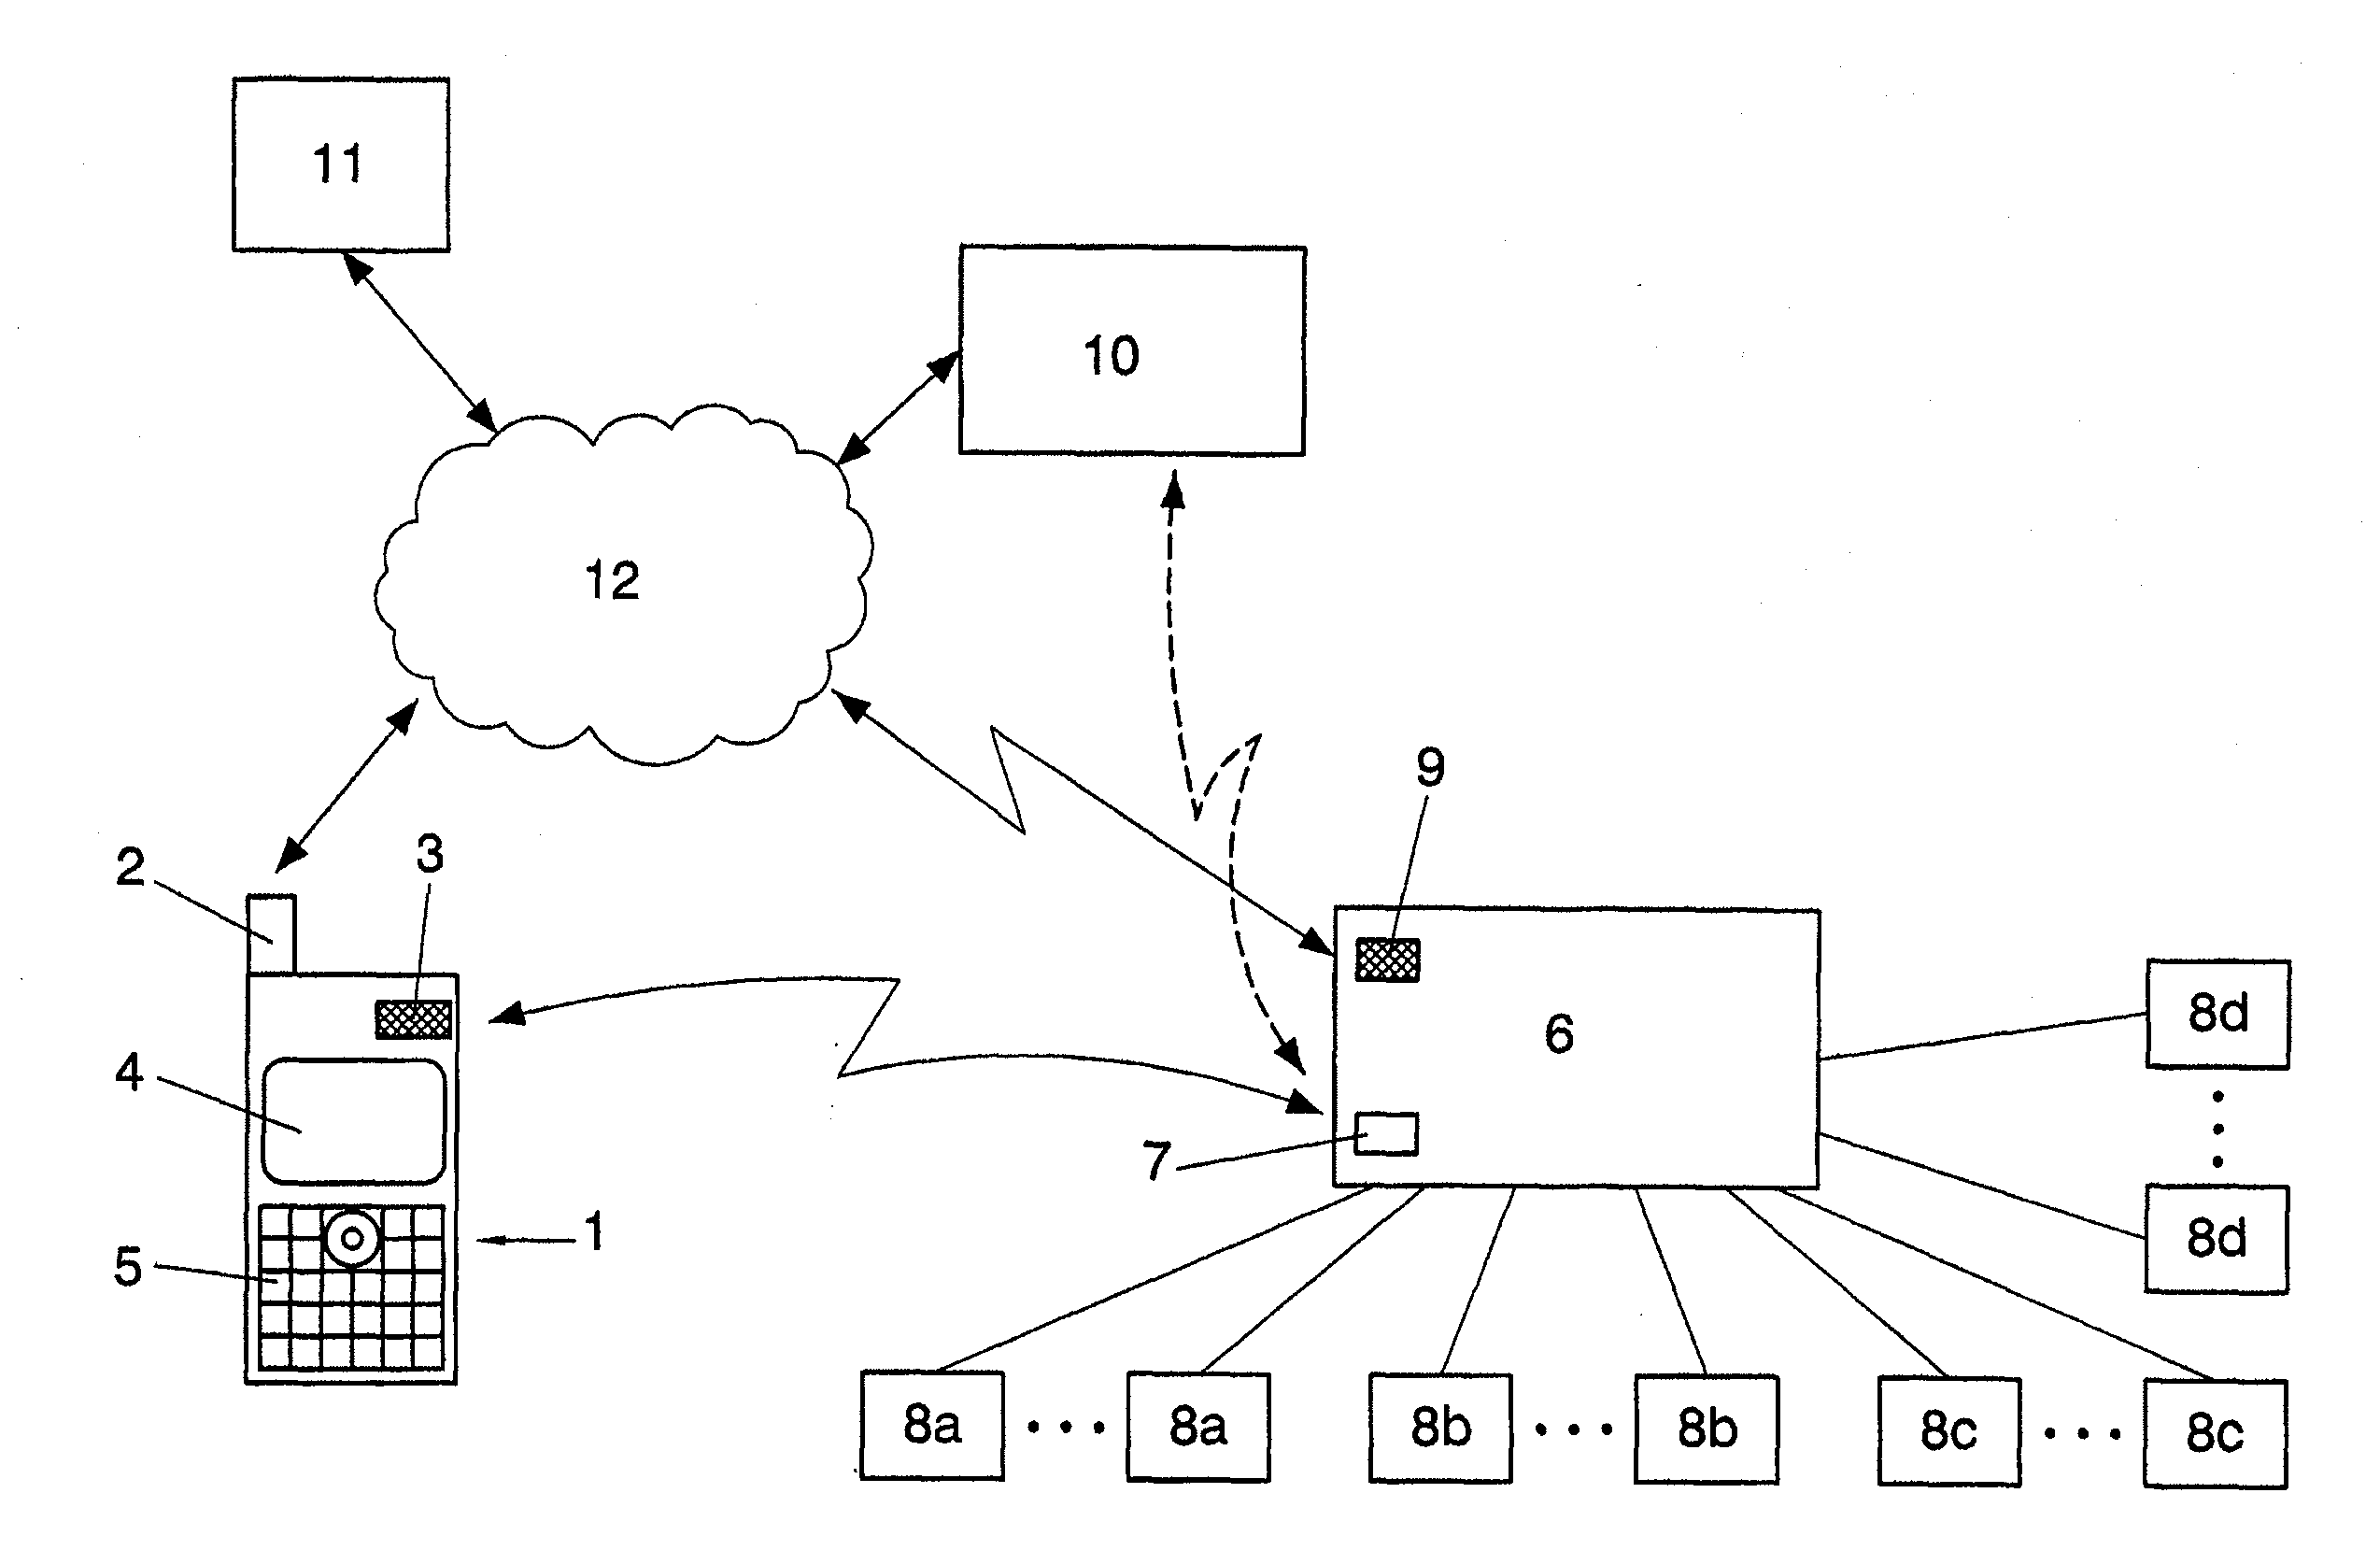 System for wirelessly controlling devices using an apparatus including a mobile telephone